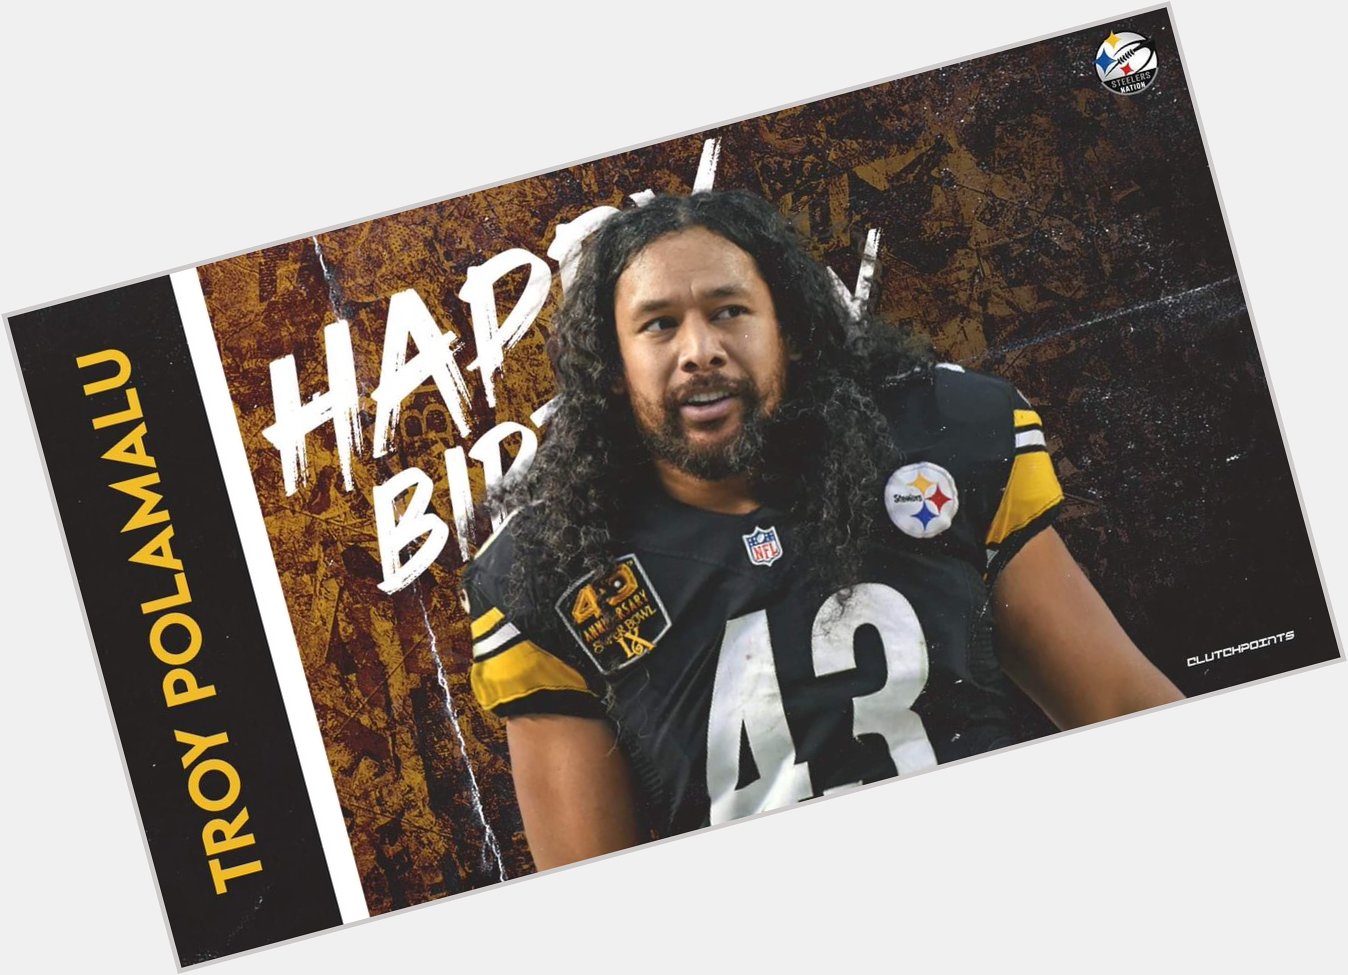 Join us in wishing all the best Steelers legend and 2x Super Bowl champ Troy Polamalu a happy 40th birthday! 